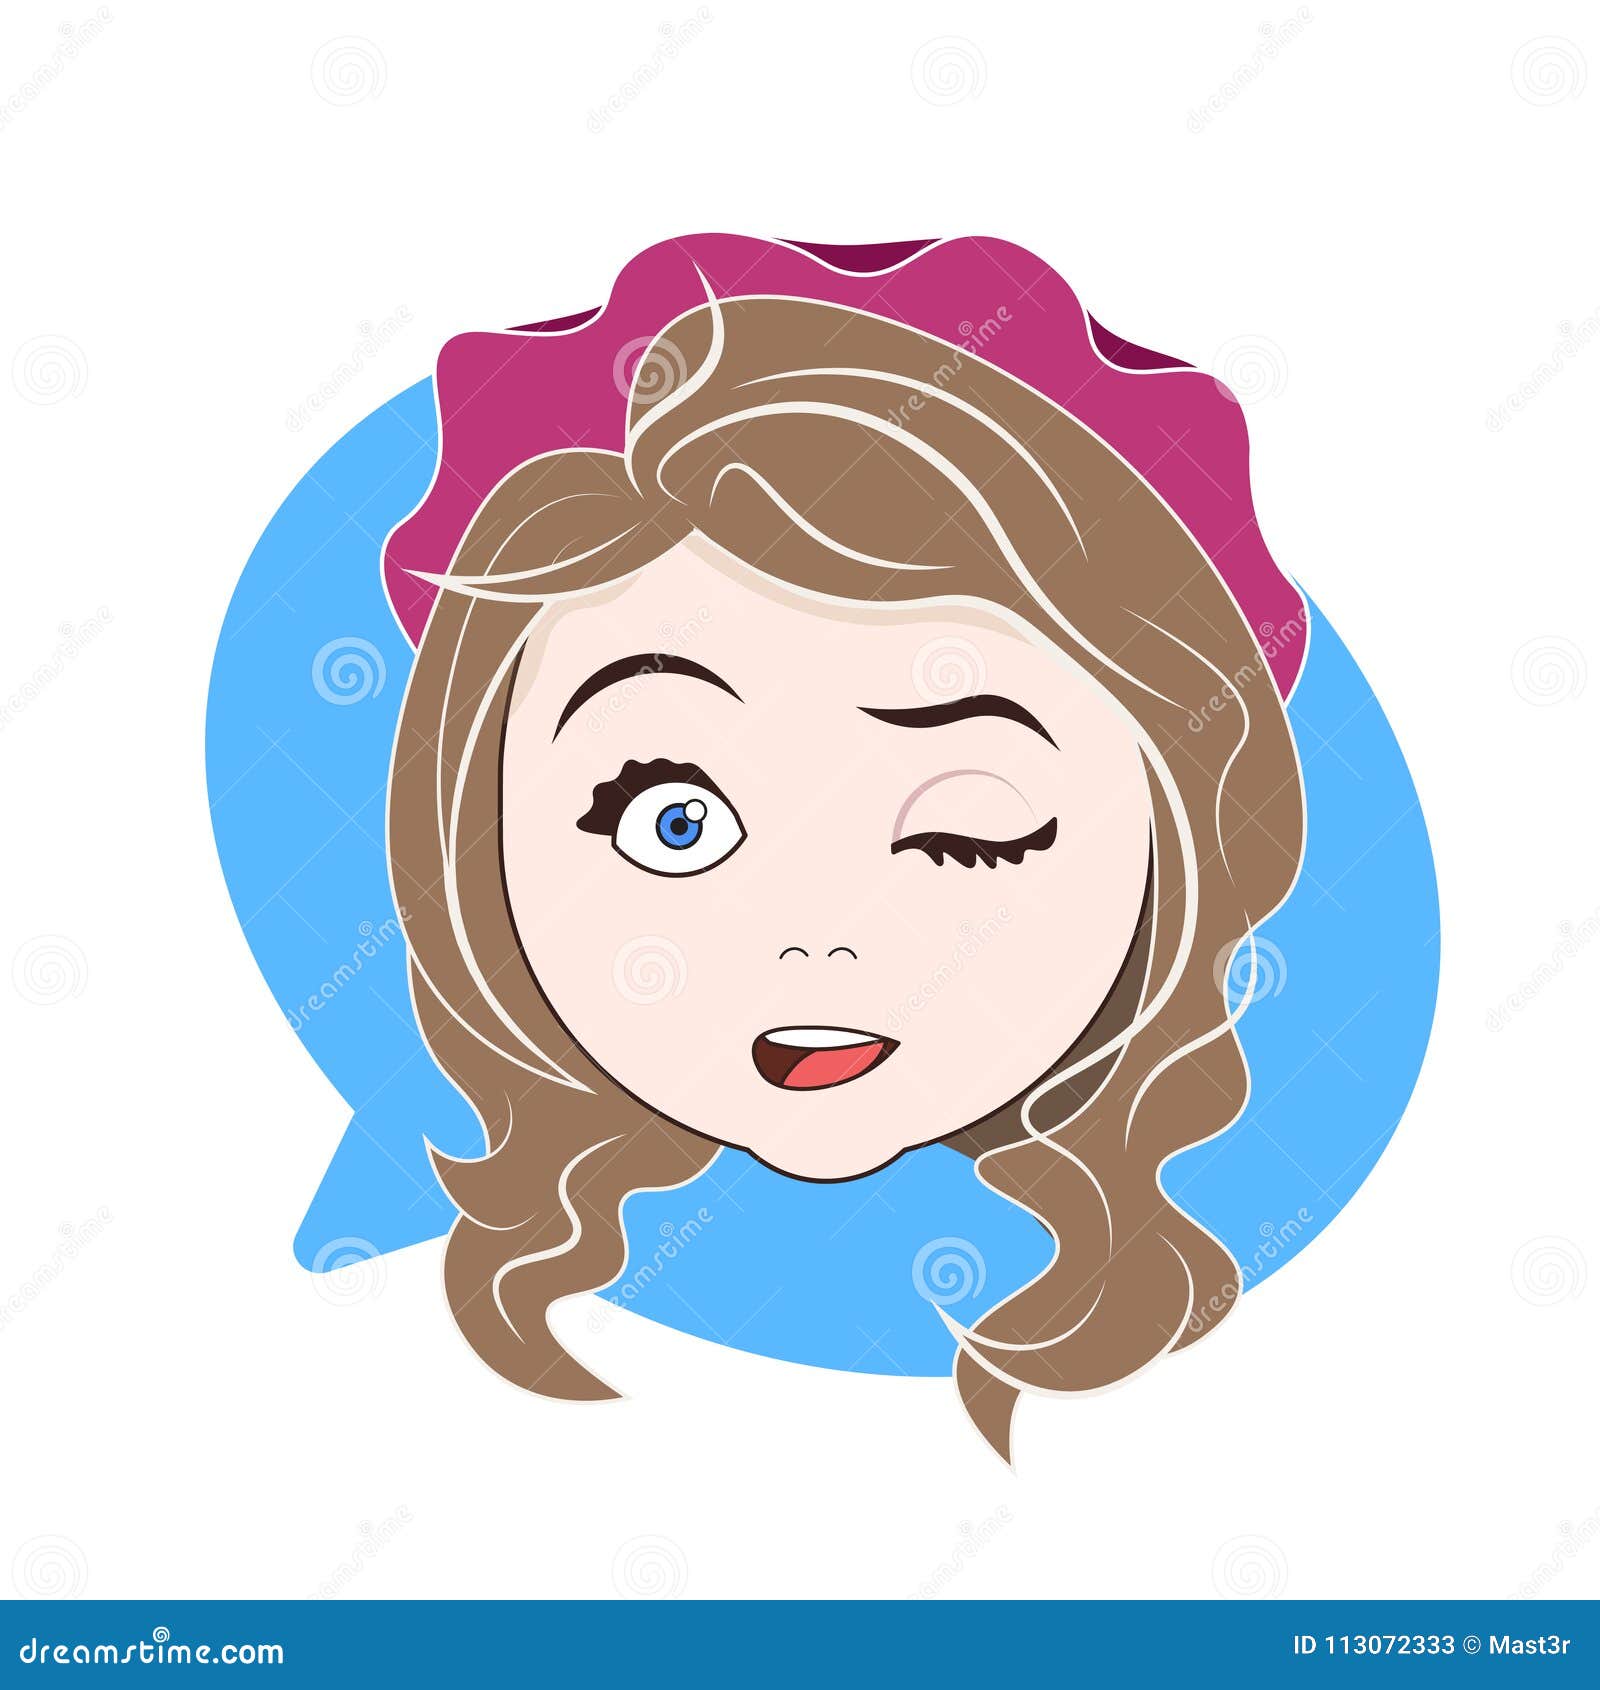 Girls chat - Girls chat updated their profile picture.